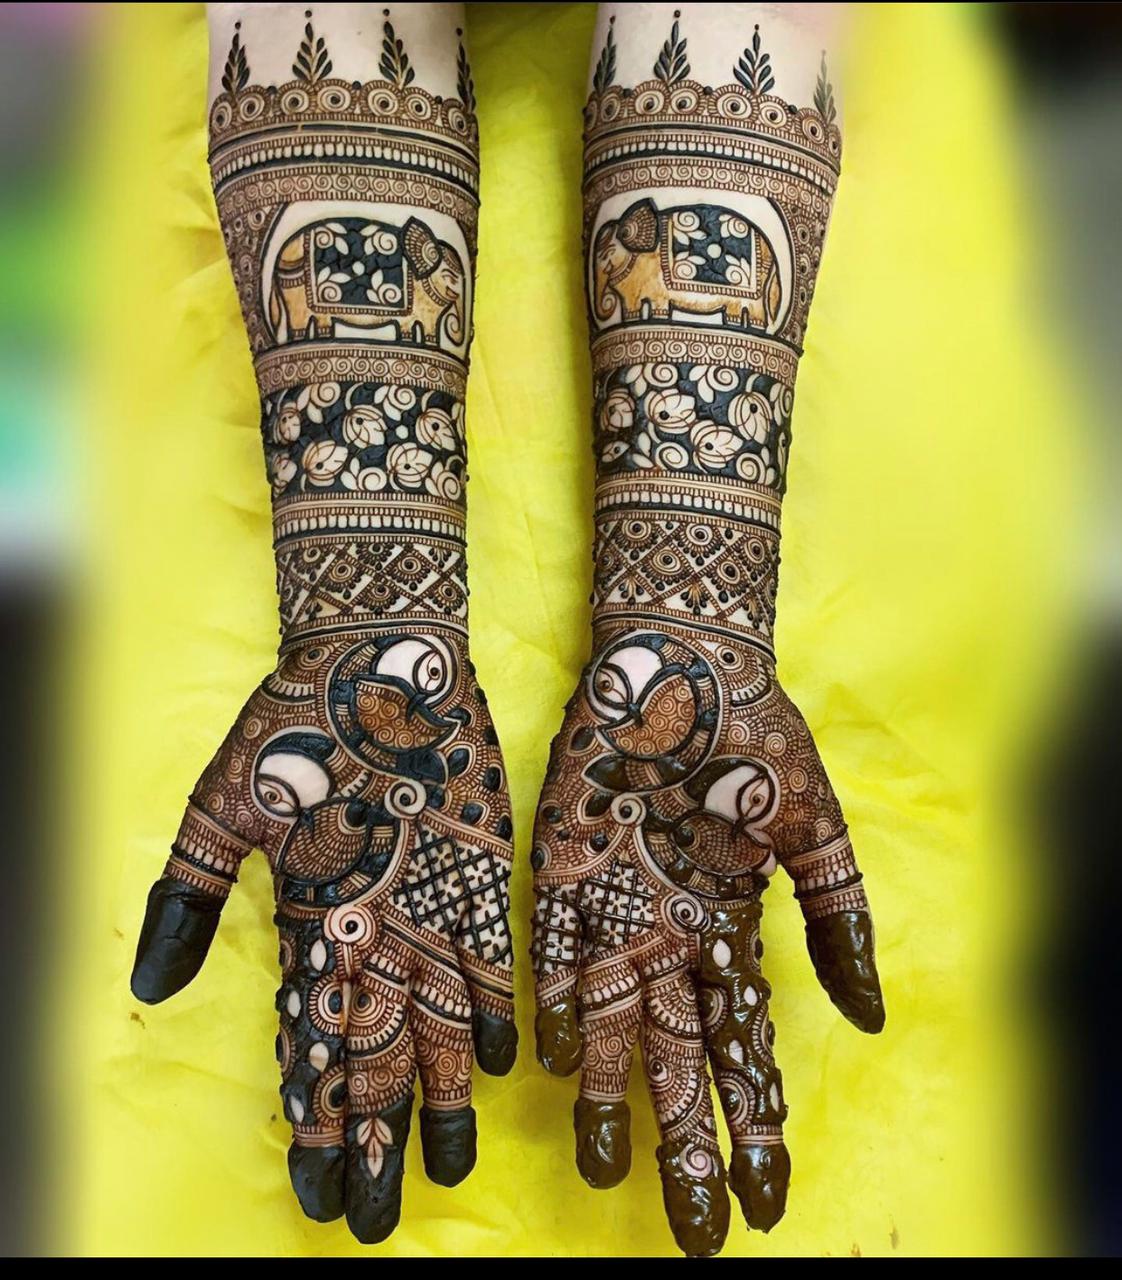 Download mehndi designs books for free by Ronak - Issuu